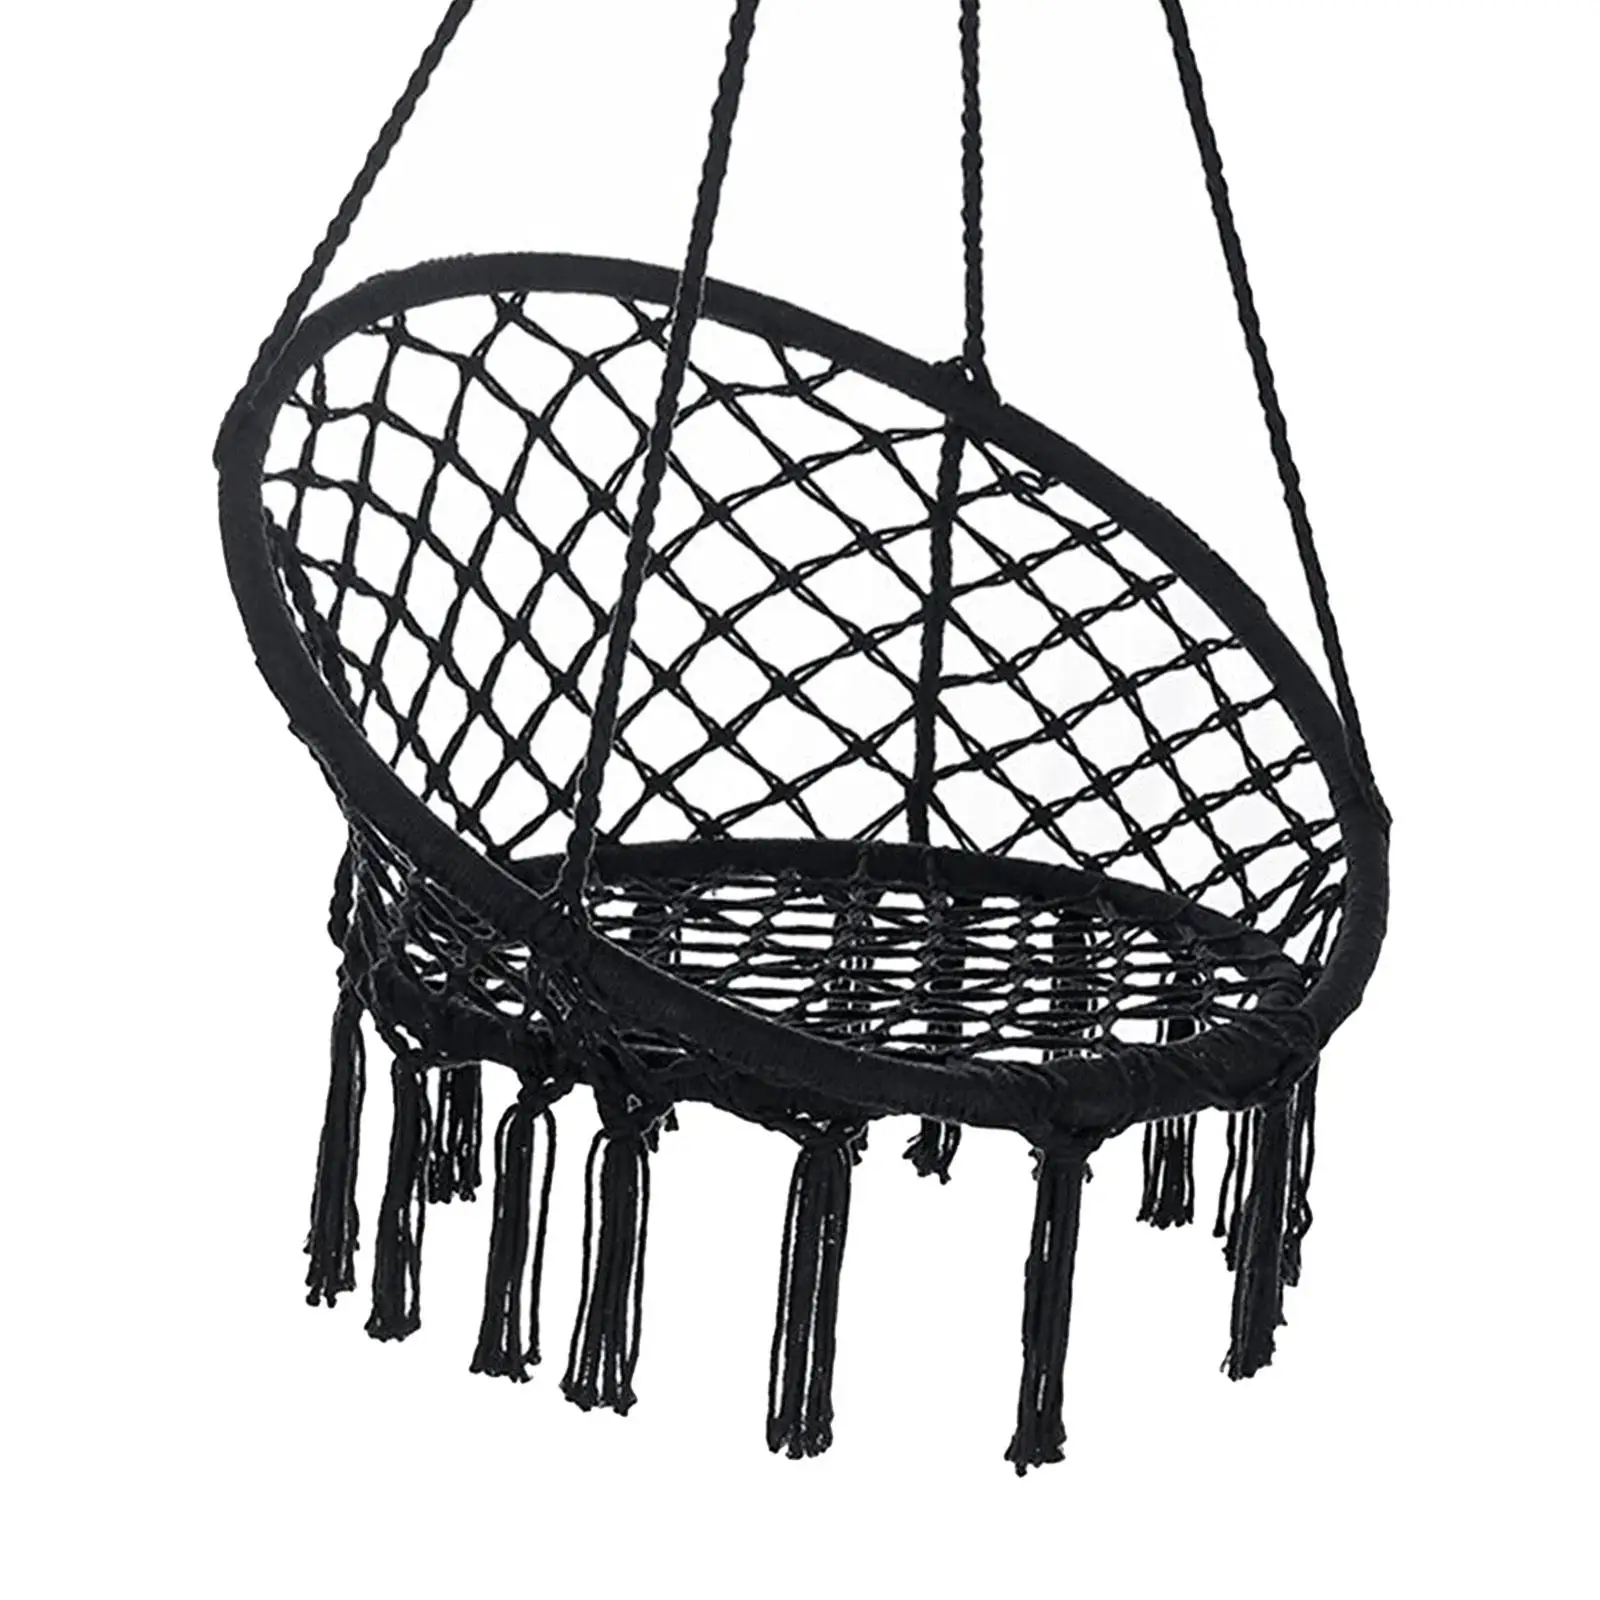 Outdoor Hammock Durable Fabric Hanging Basket Nordic Ceiling Chairs Breathable Swing for Backyard Child Adult Patio Outside Tree